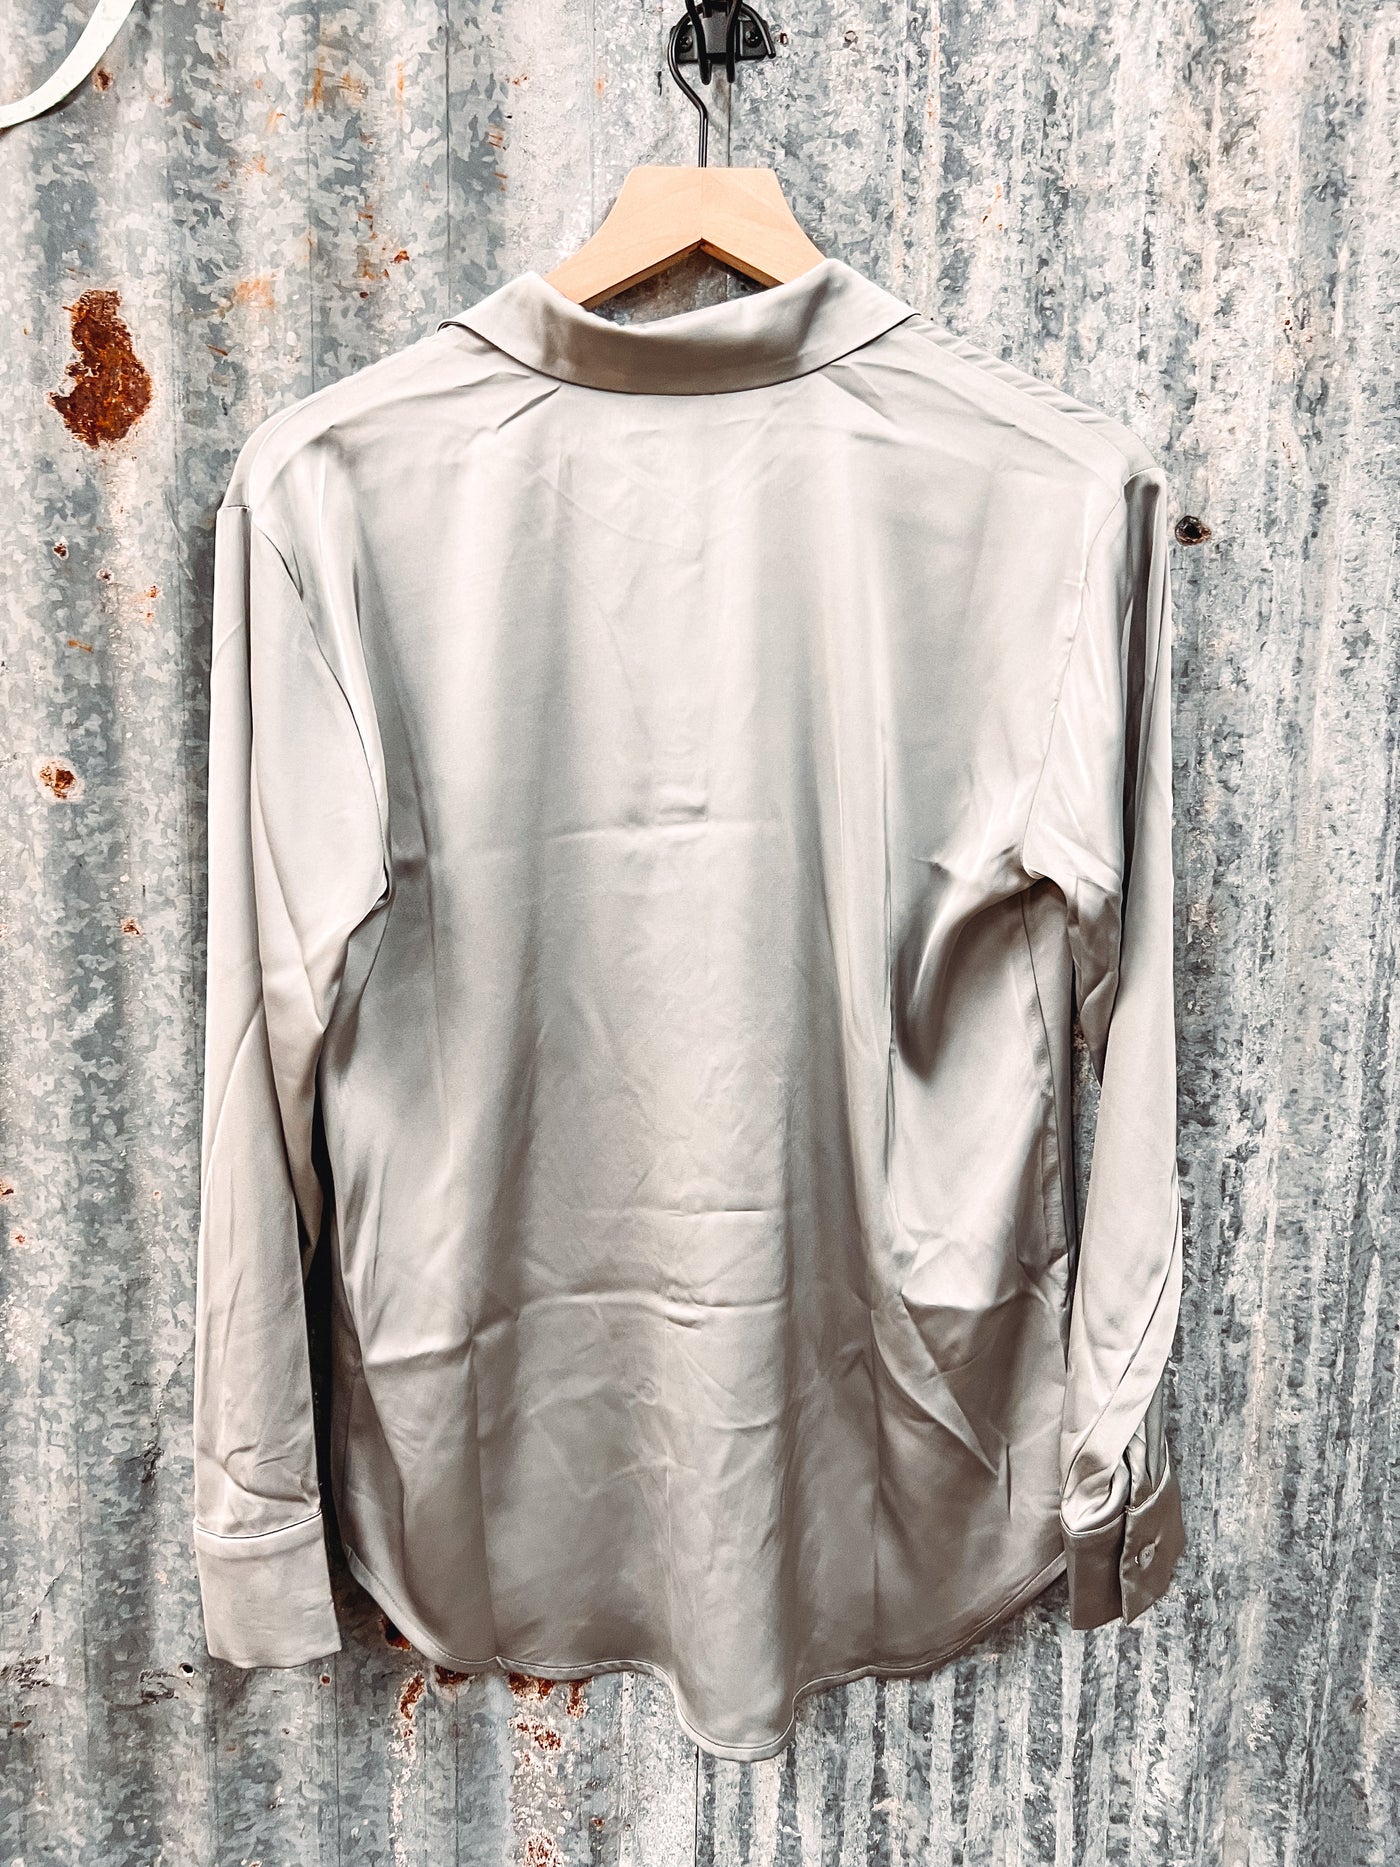 Silver - Satin Button Up - M & L